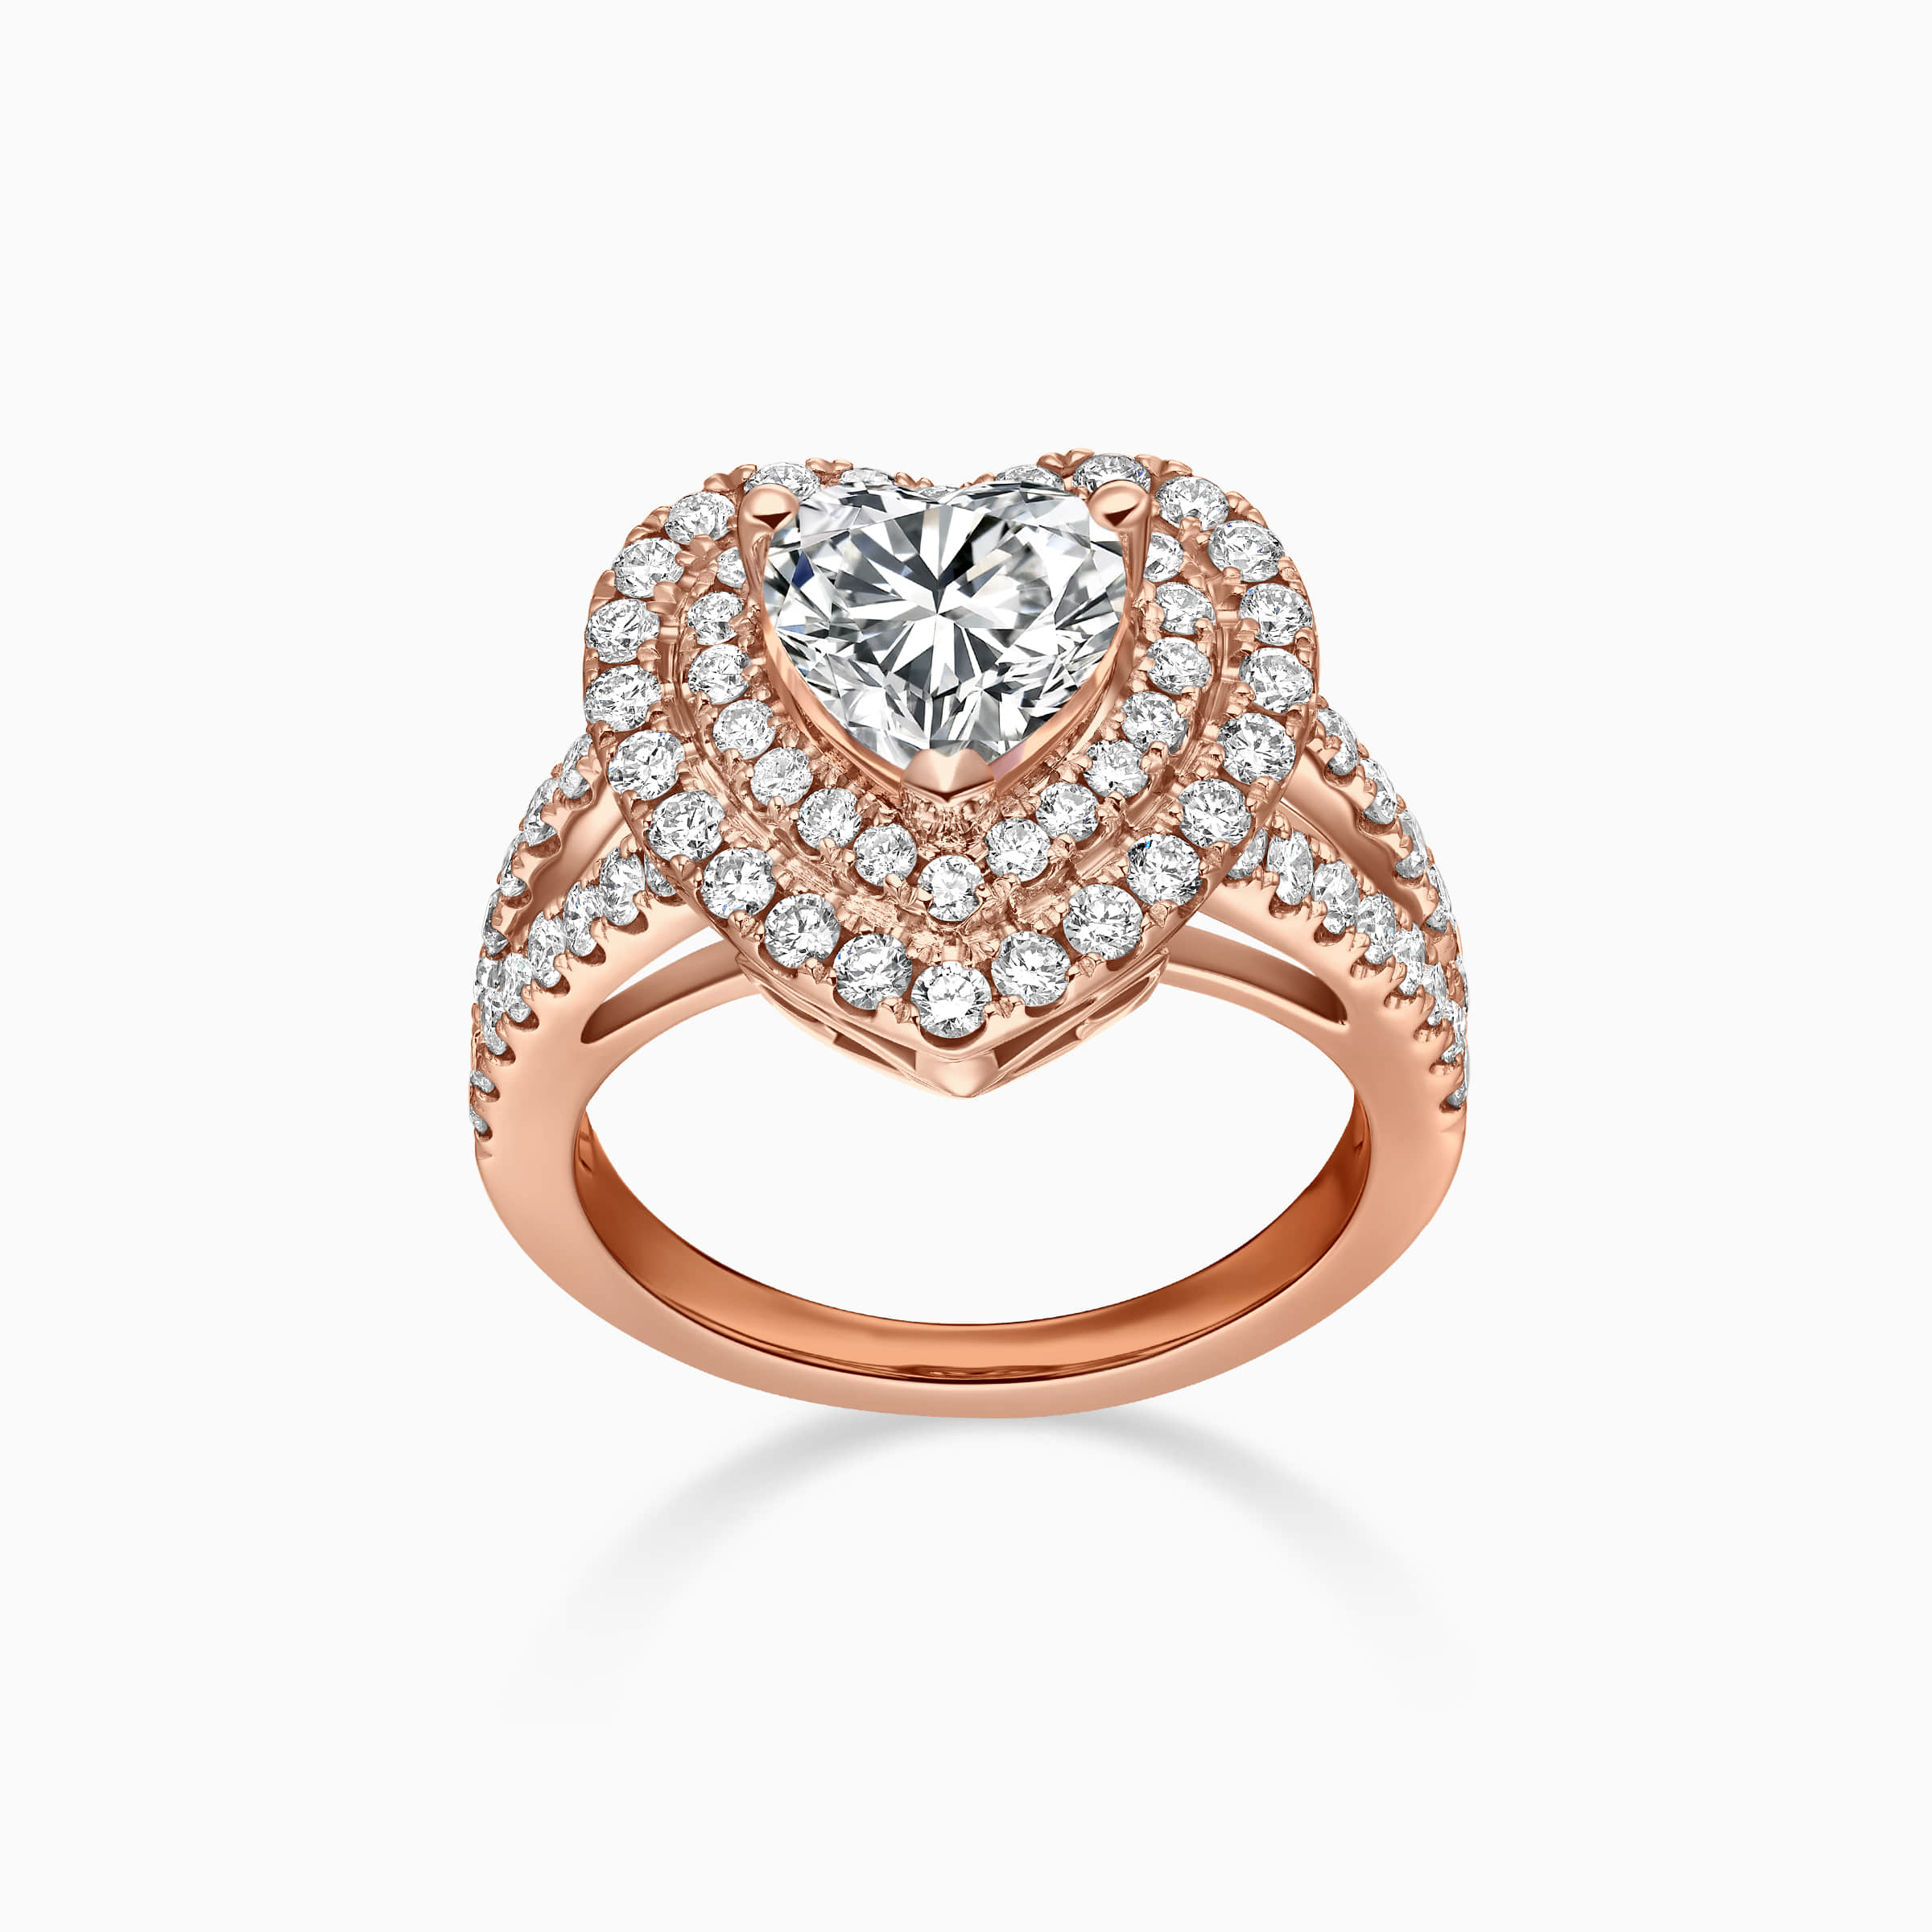 Darry Ring double halo heart engagement ring in rose gold